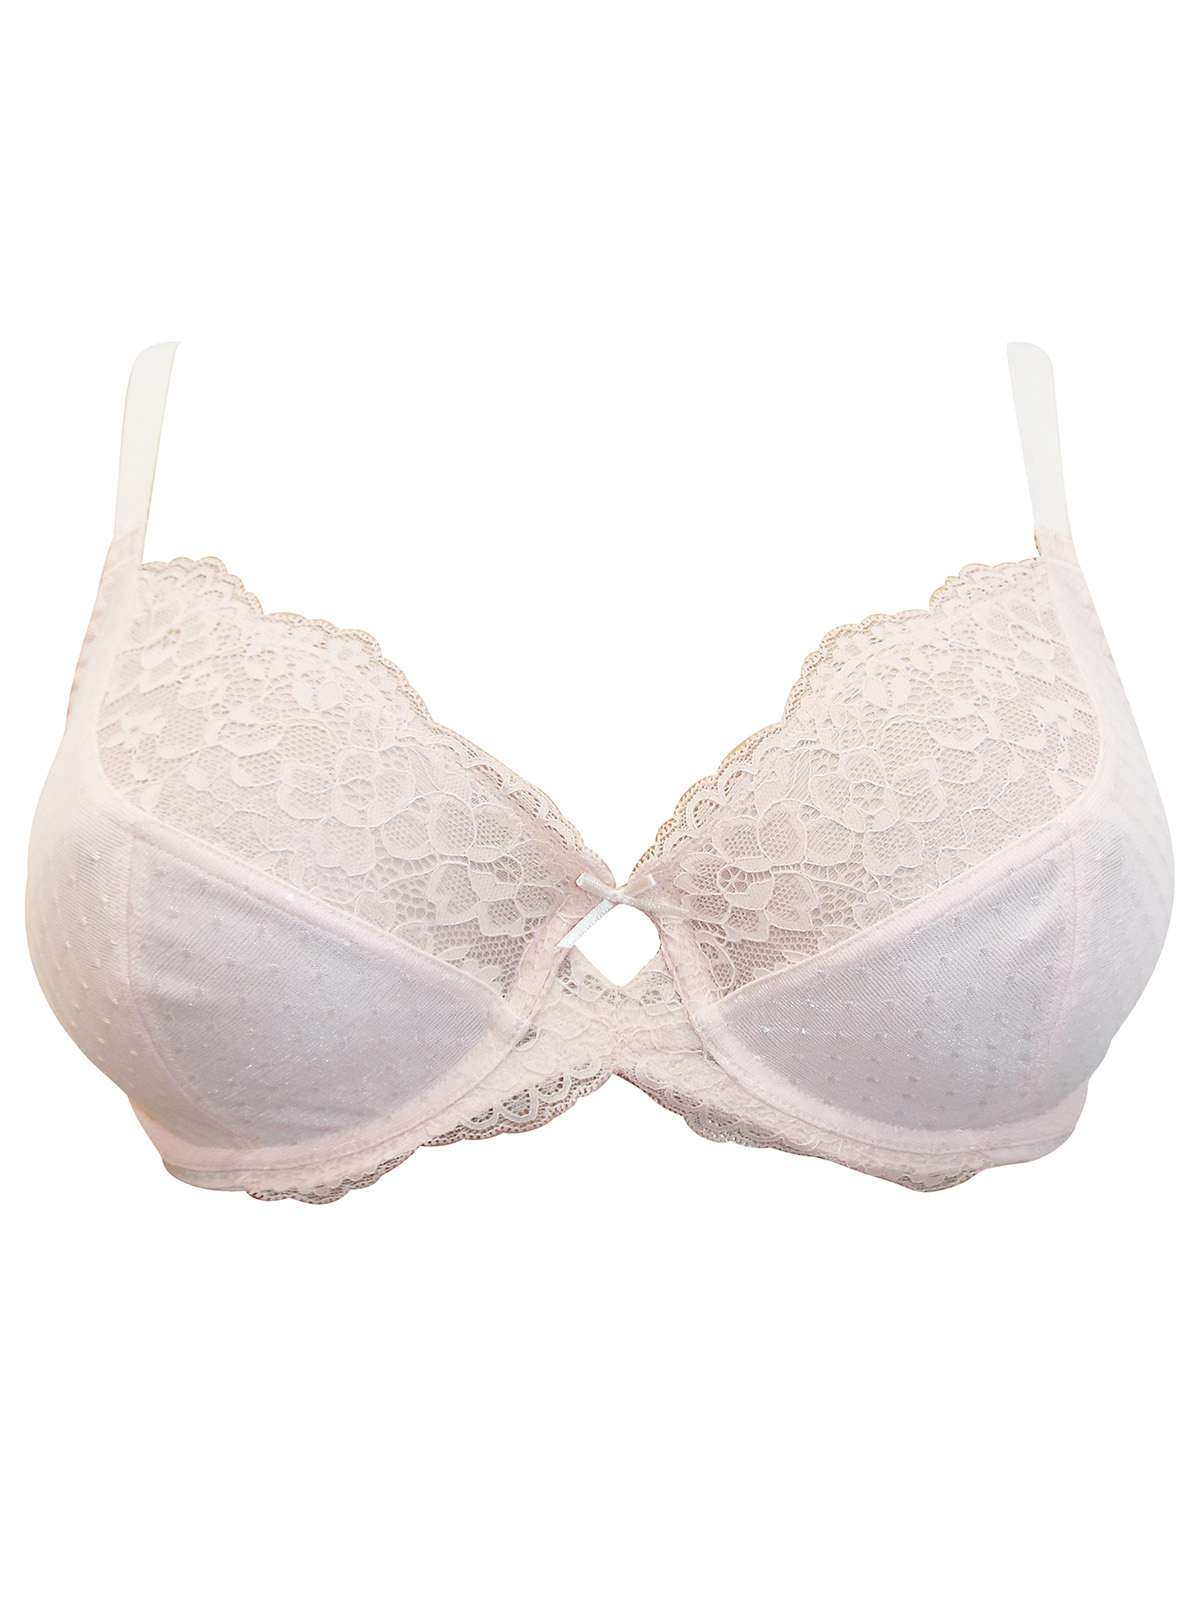 George - - G3ORGE PINK Non-Padded Full Cup Bra - Size 36 (DD cup)